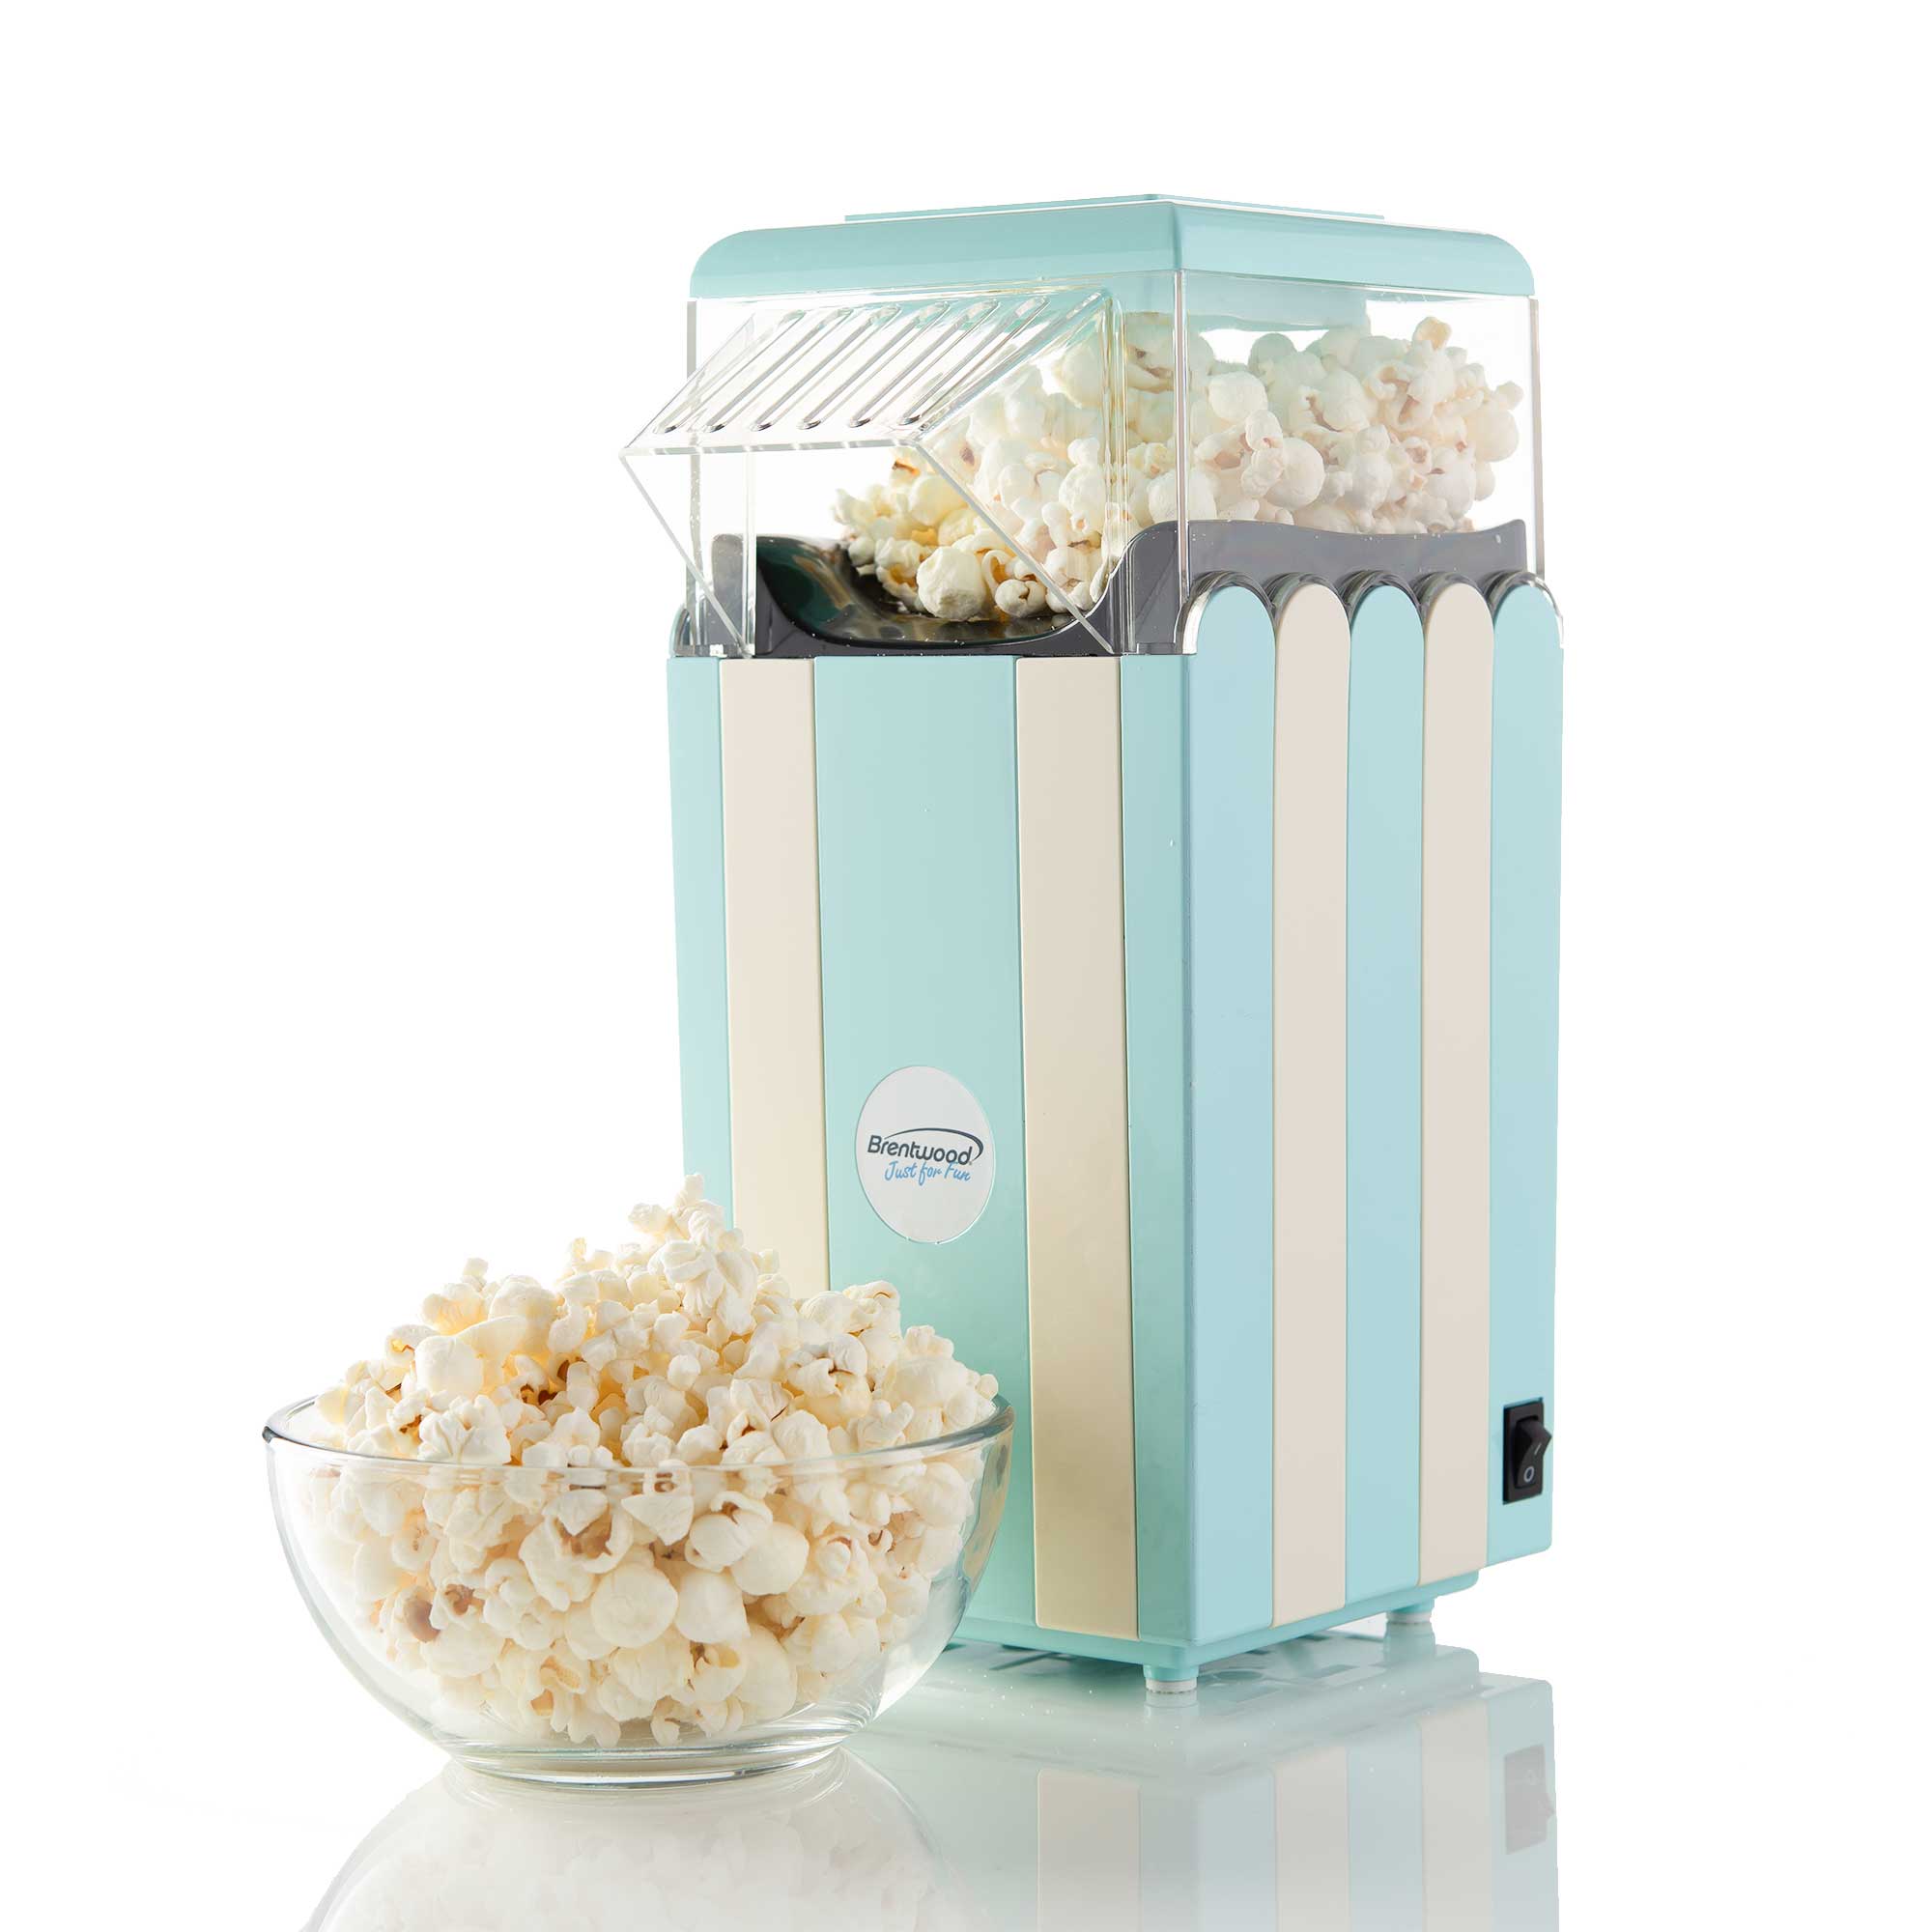 Brentwood Jumbo 24-Cup Hot Air Popcorn Maker in Red